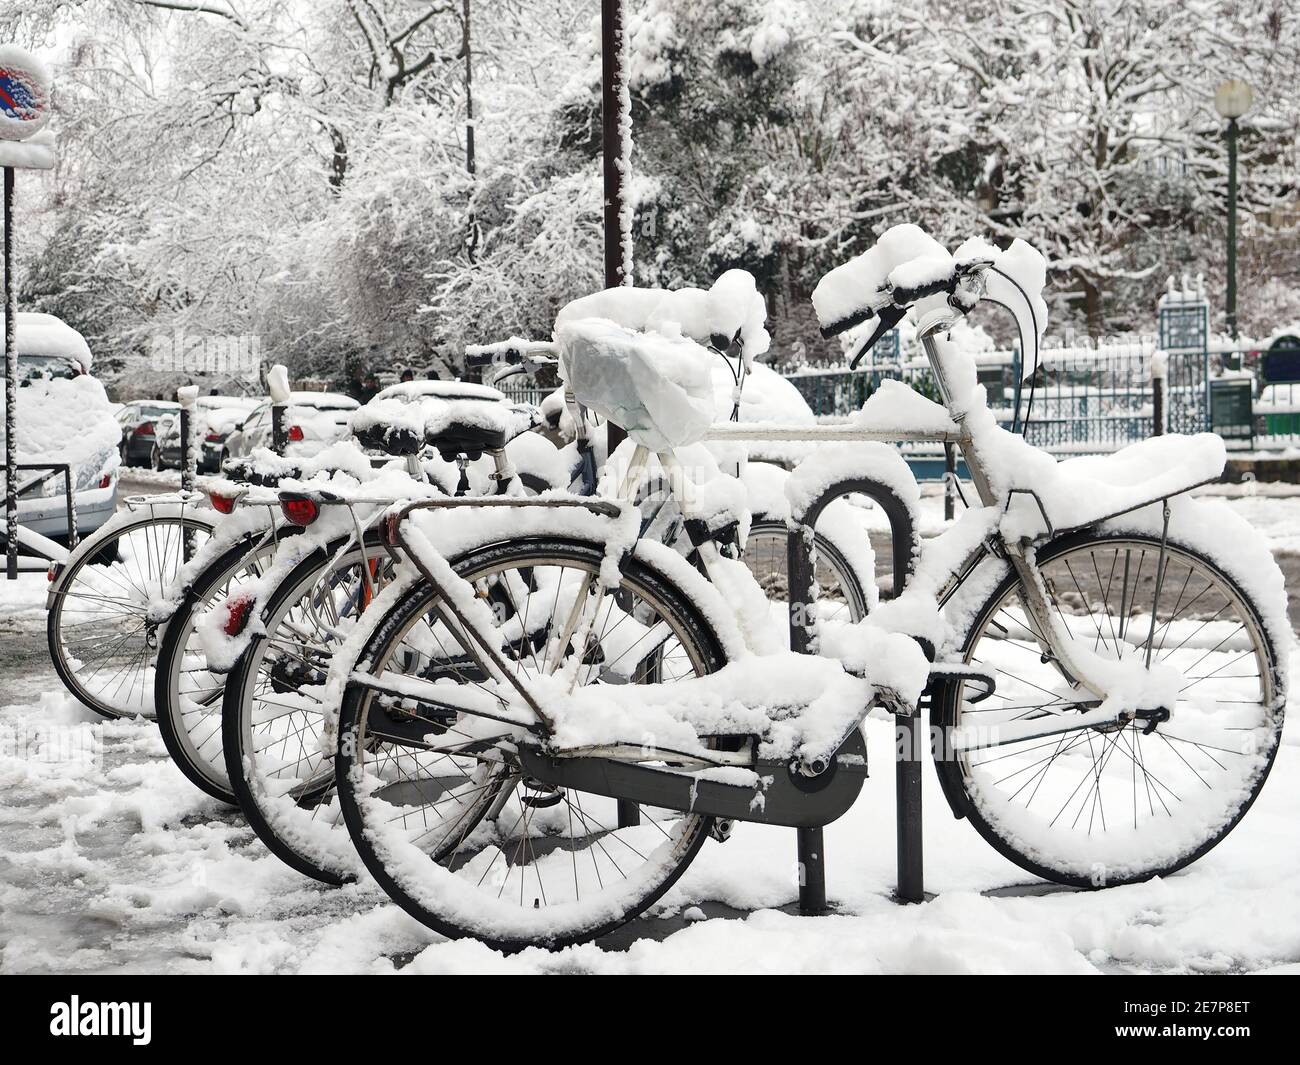 Parisian bicycles covered in snow Stock Photo